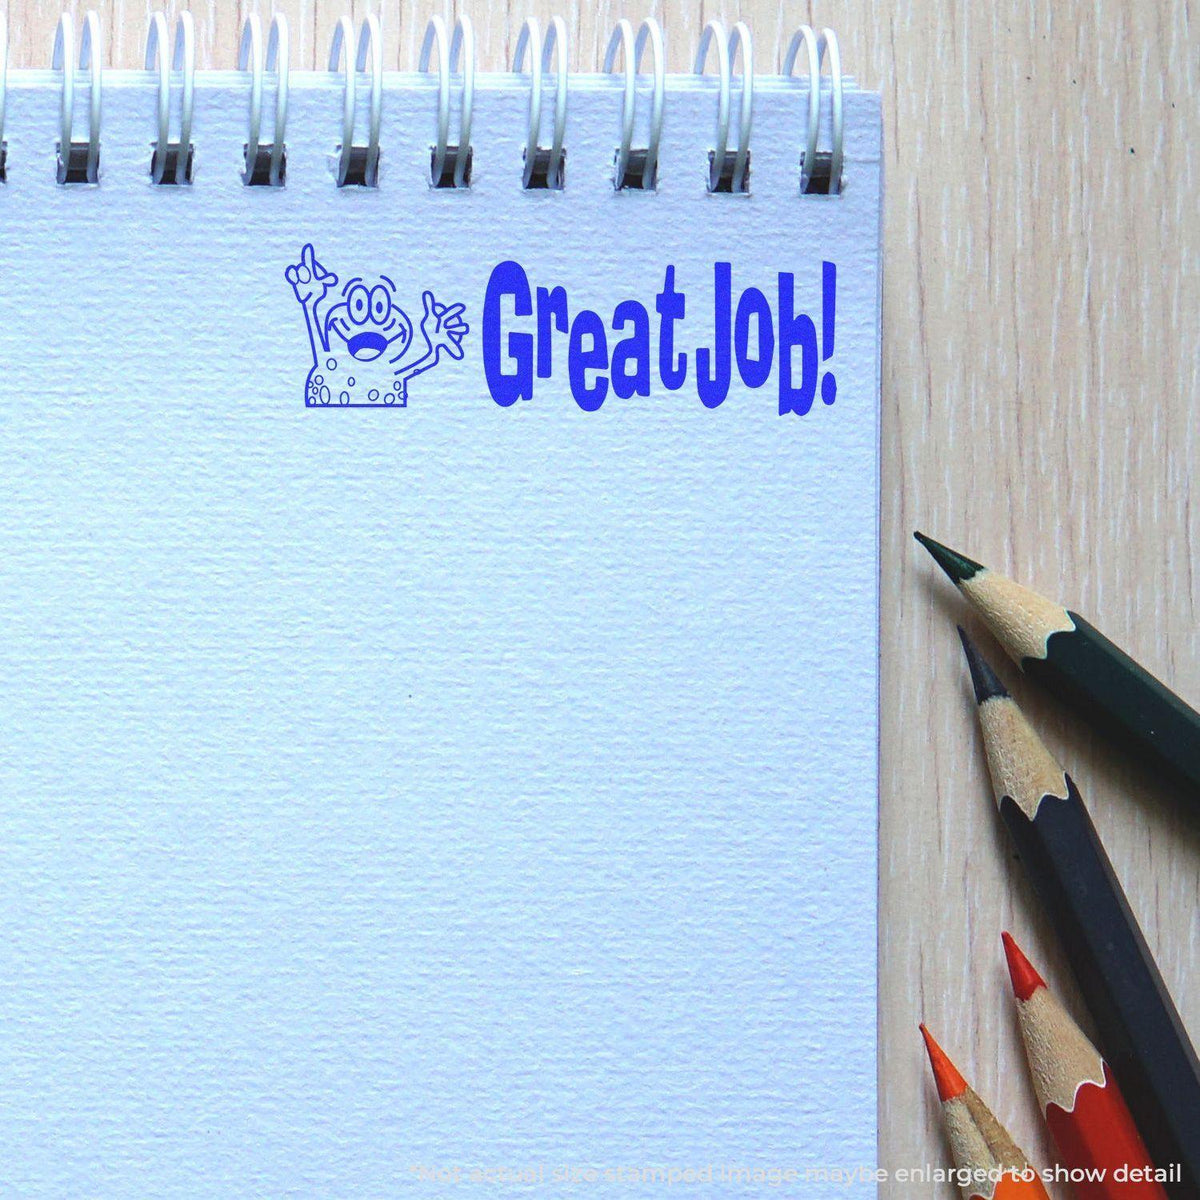 In Use Great Job Rubber Stamp Image